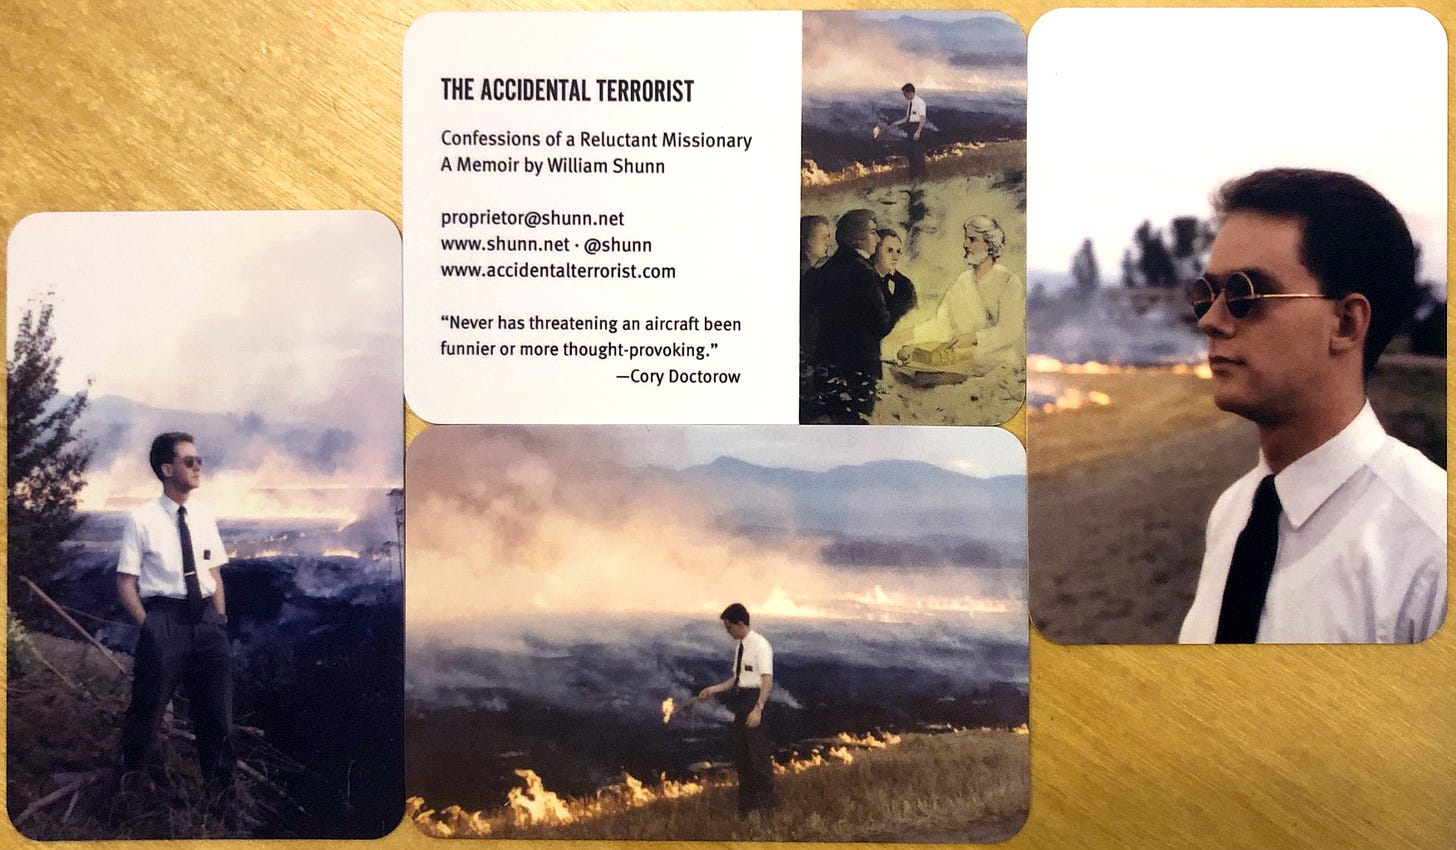 An array of four business cards, one showing information about the book The Accidental Terrorist, the other three showing various images of William Shunn as a young missionary posing near a burning wheat field.